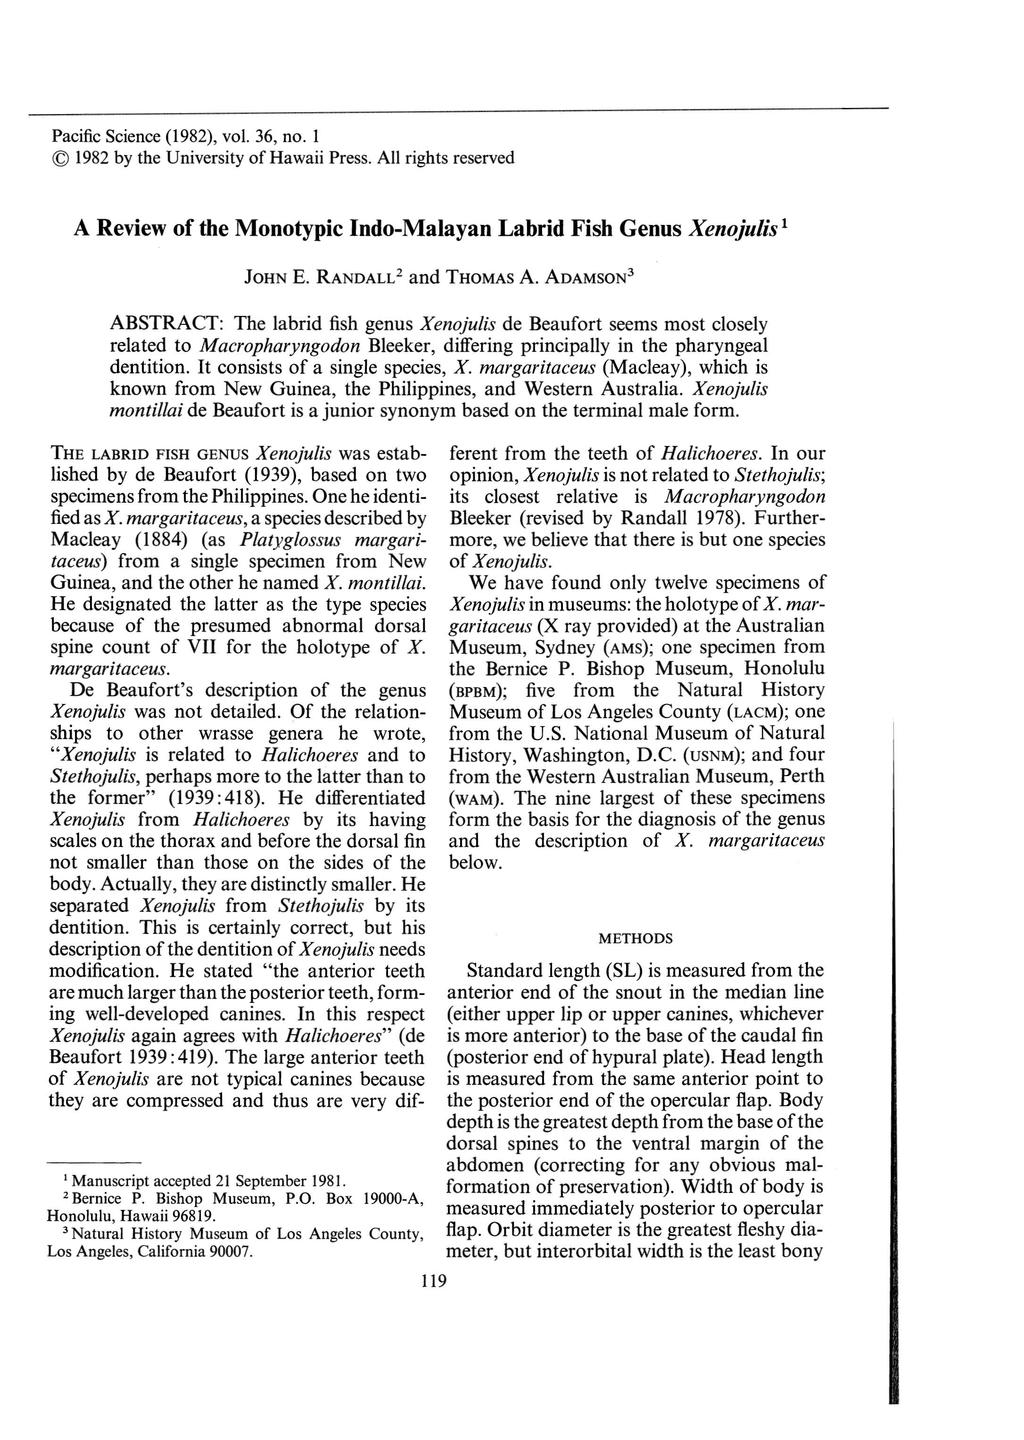 Pacific Science (1982), vol. 36, no. 1 1982 by the University of Hawaii Press. All rights reserved A Review of the Monotypic Indo-Malayan Labrid Fish Genus Xenojulis 1 JOHN E. RANDALL 2 and THOMAS A.